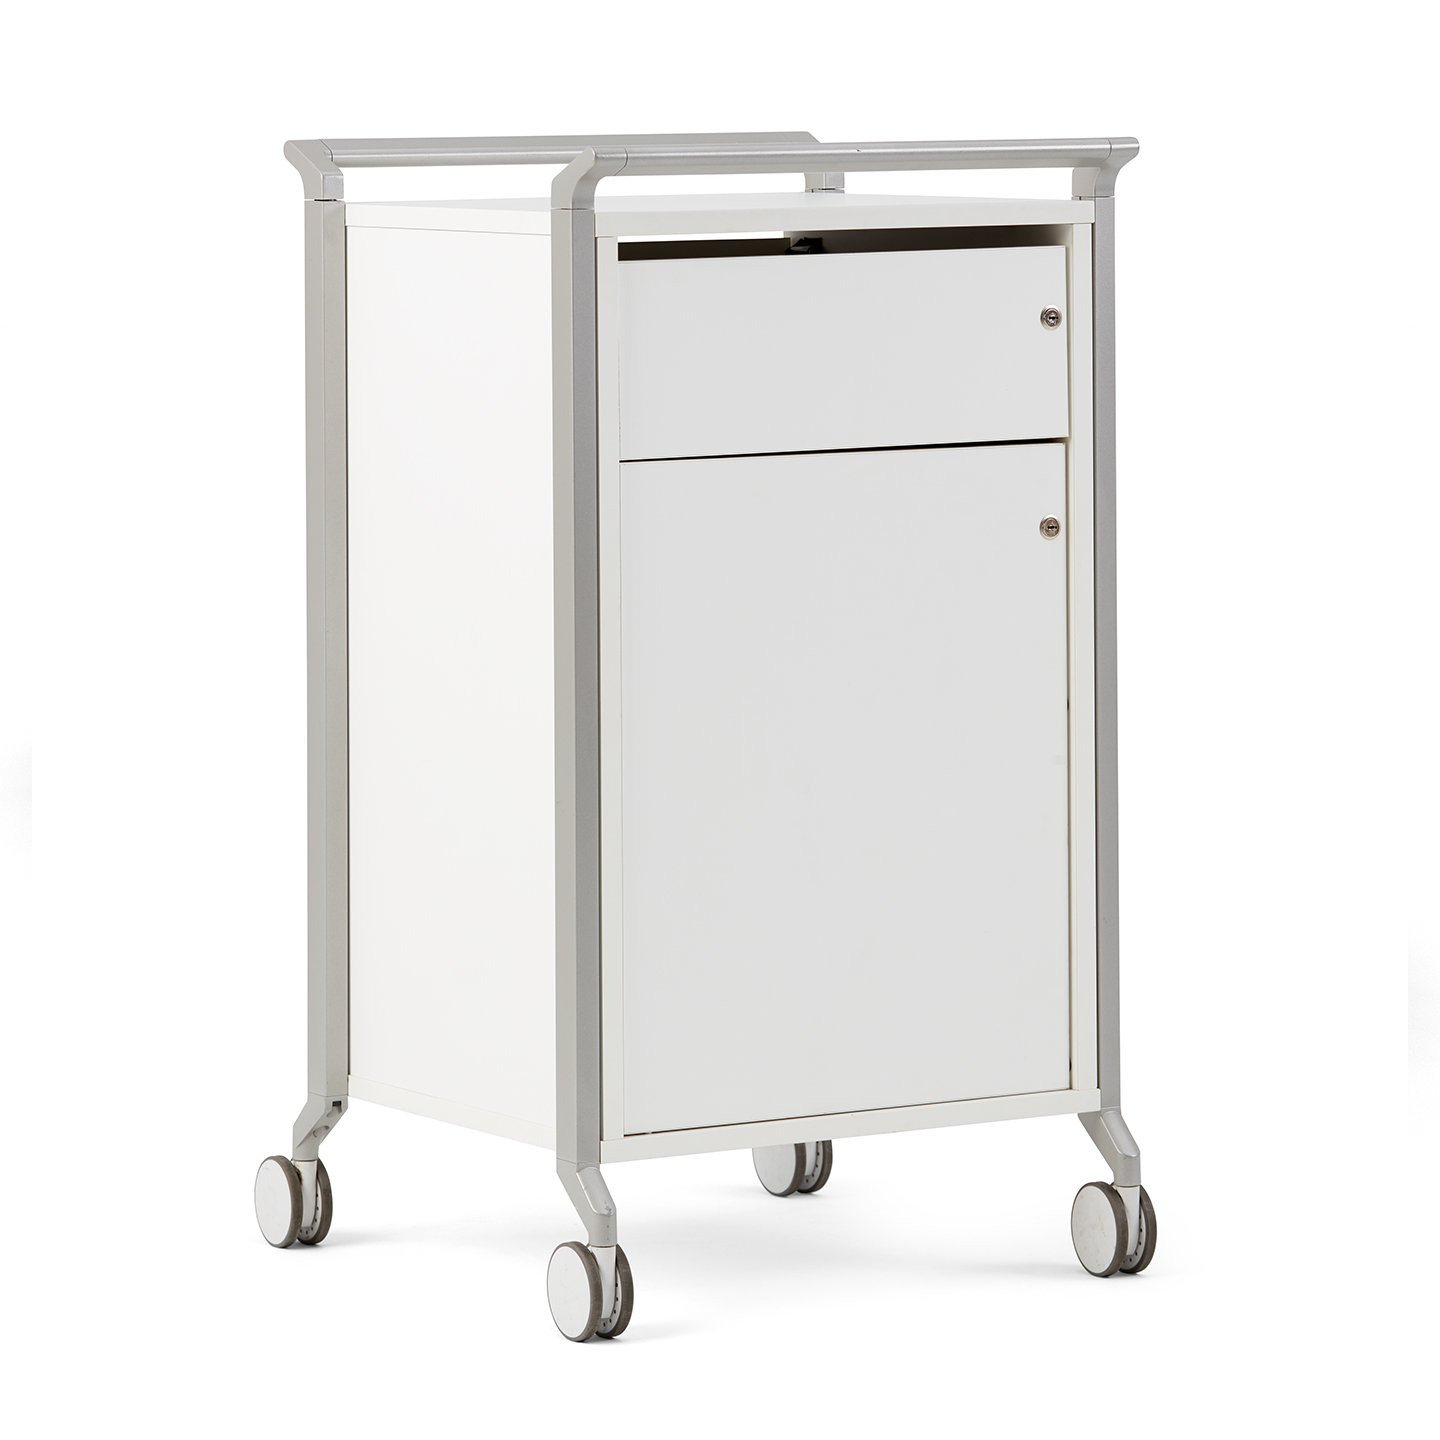 Haworth Planes Accessories cart in white with steel frame and wheels